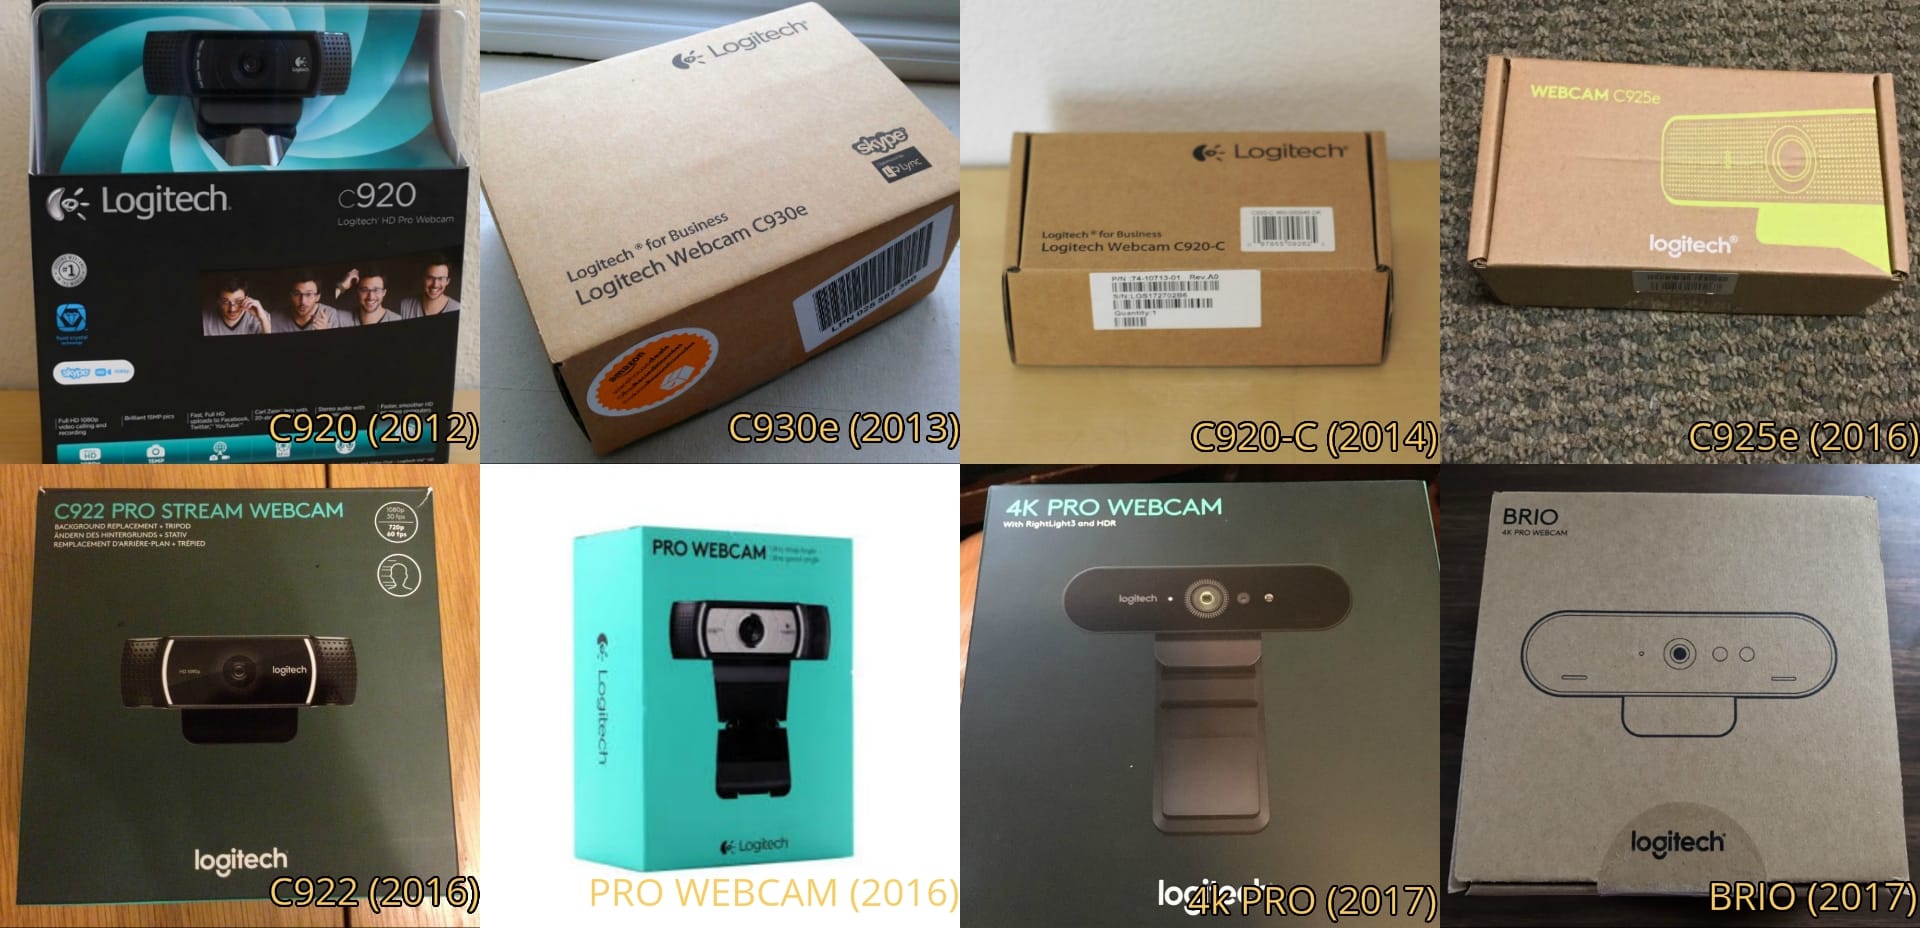 All Top Logitech Webcams Compared (Including the 4k PRO/Brio)